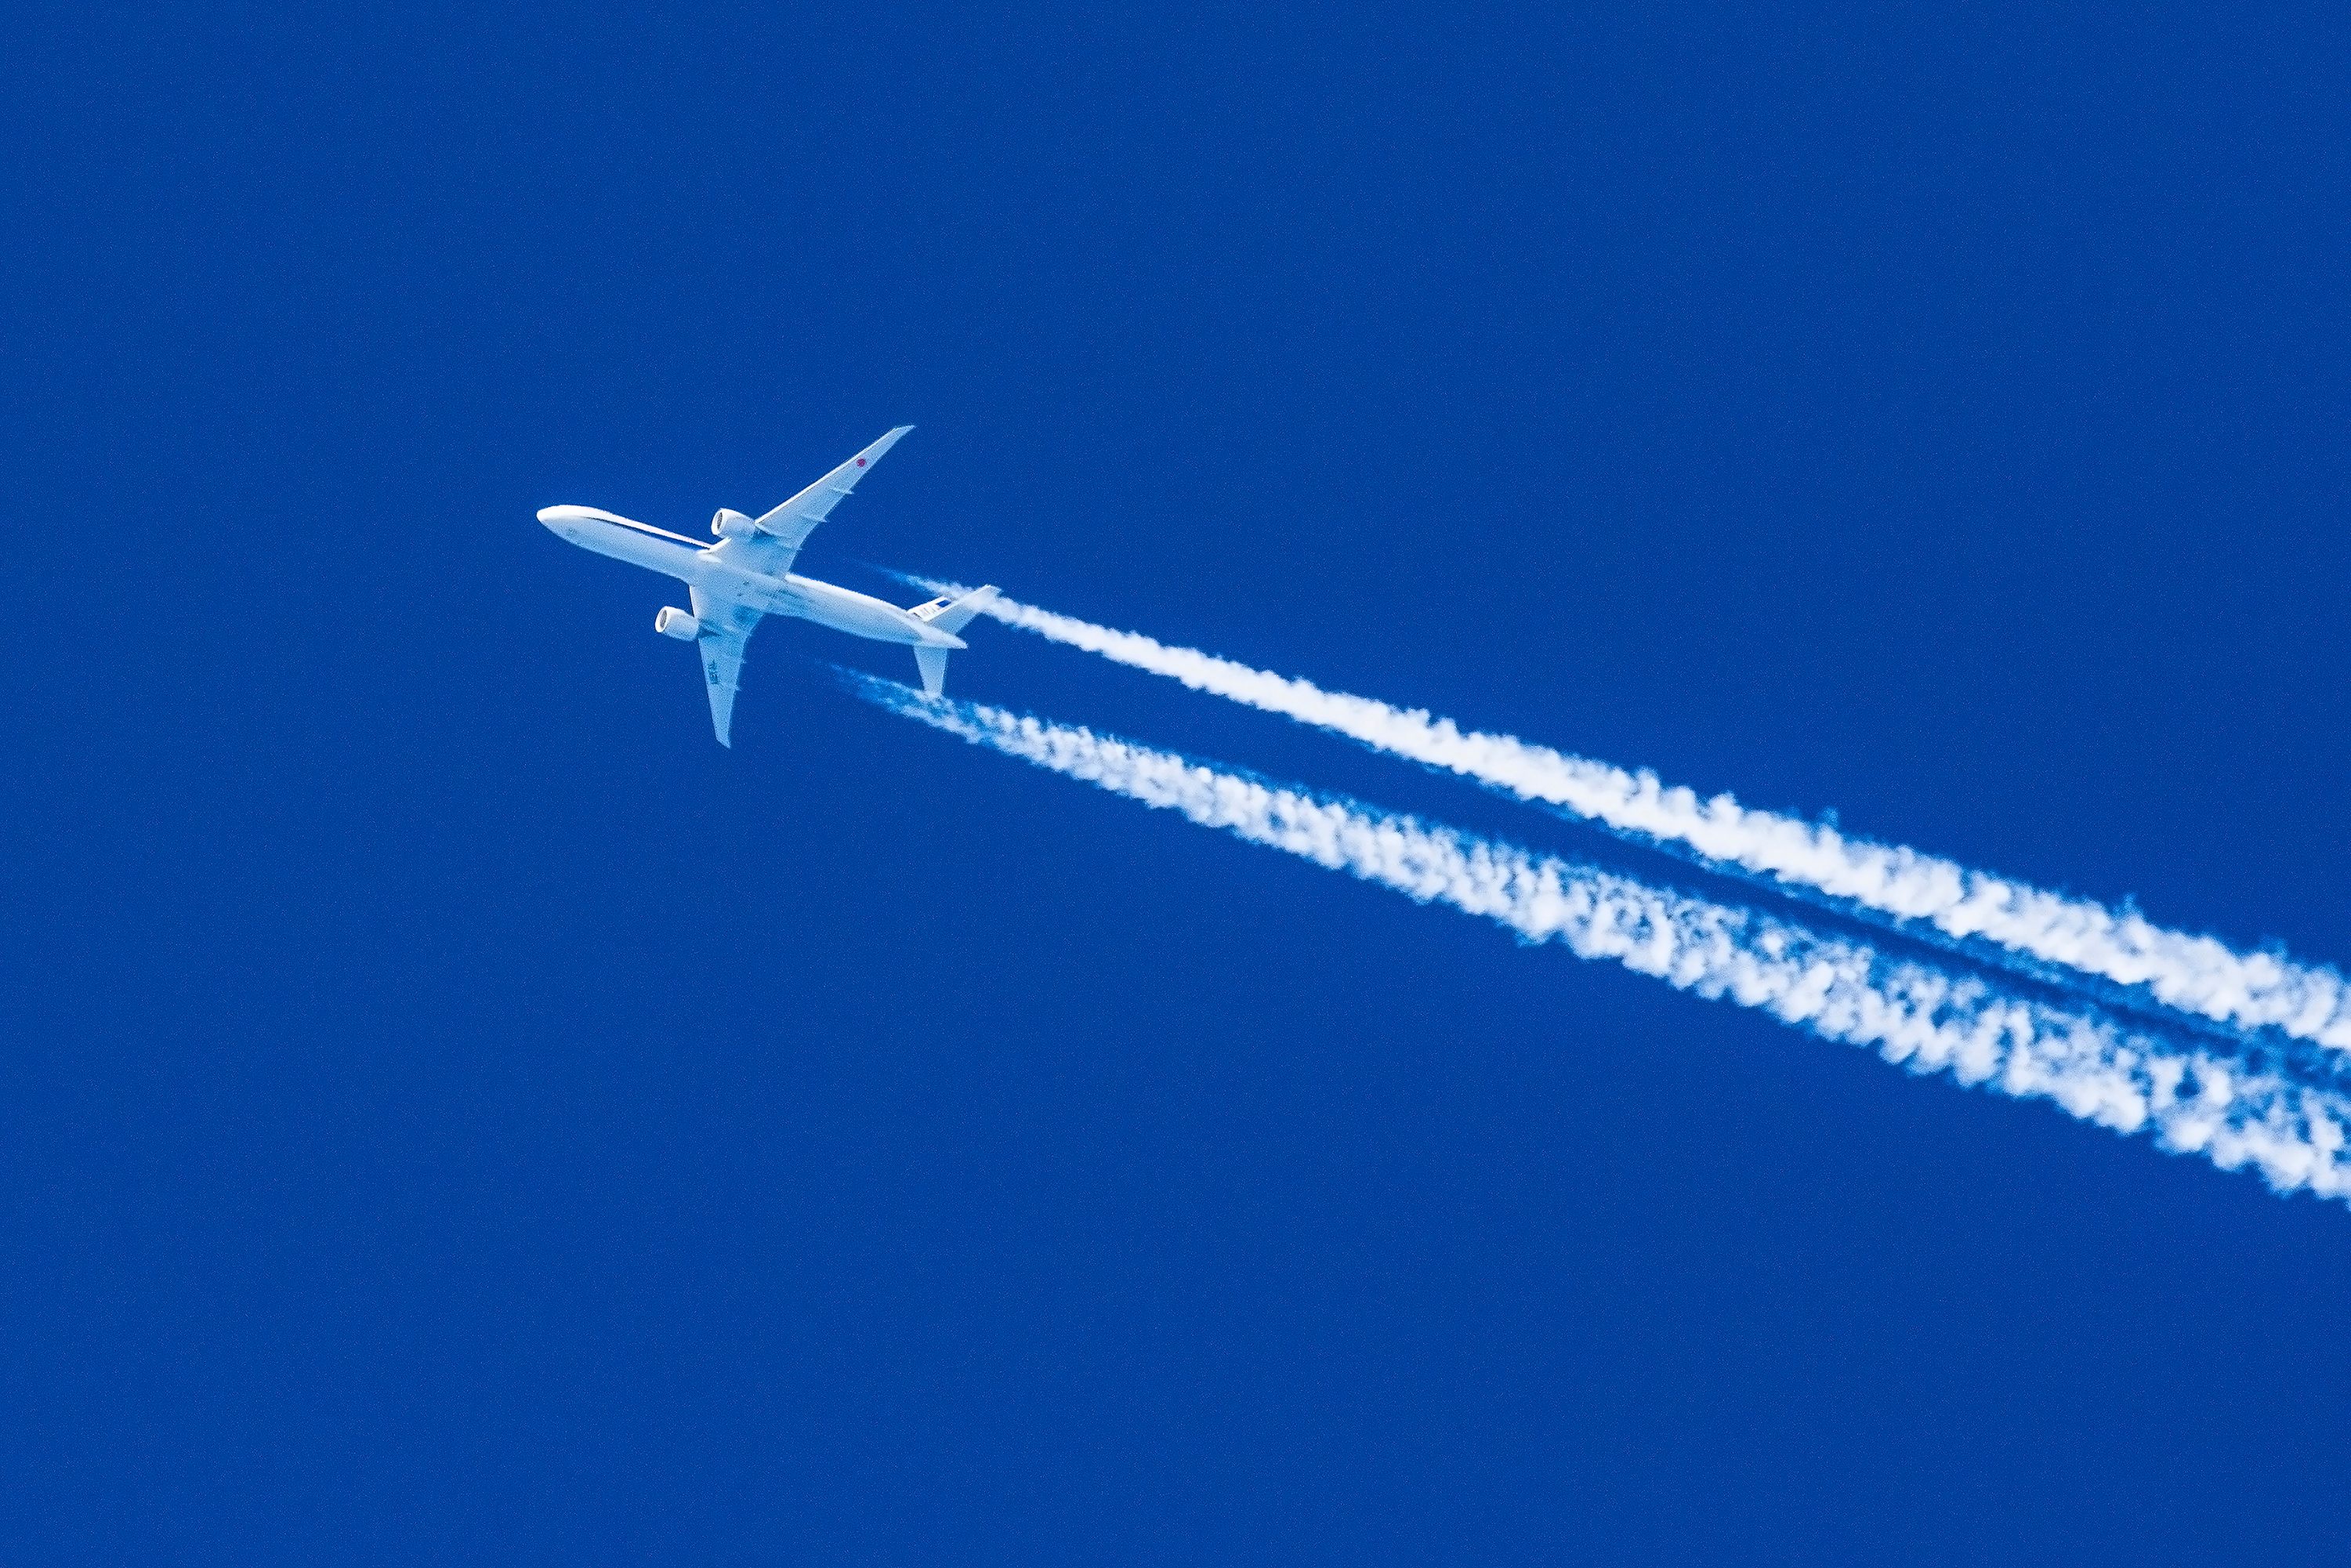 A jet aircraft flying with contrails behind it.